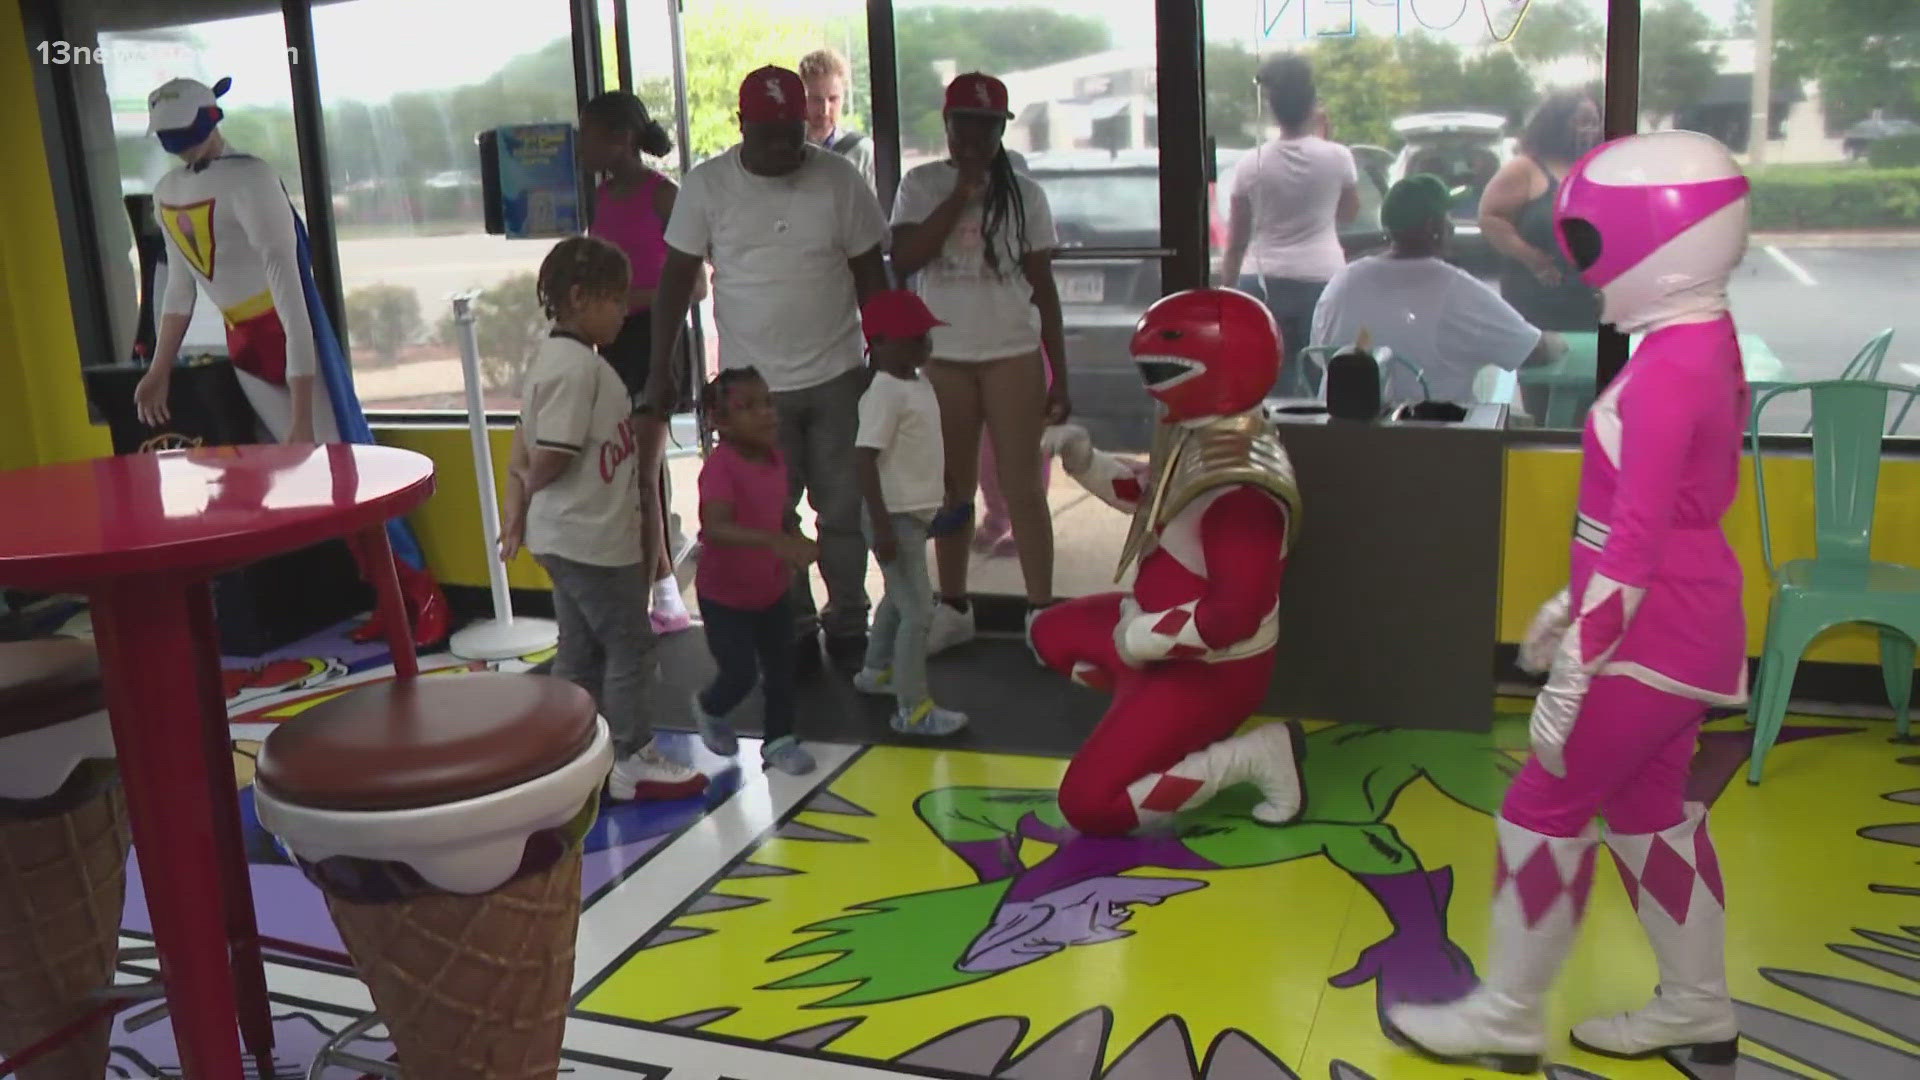 Tonight, a local ice cream shop held a fundraiser for the family of 10-year-old Keontre Thornhill.